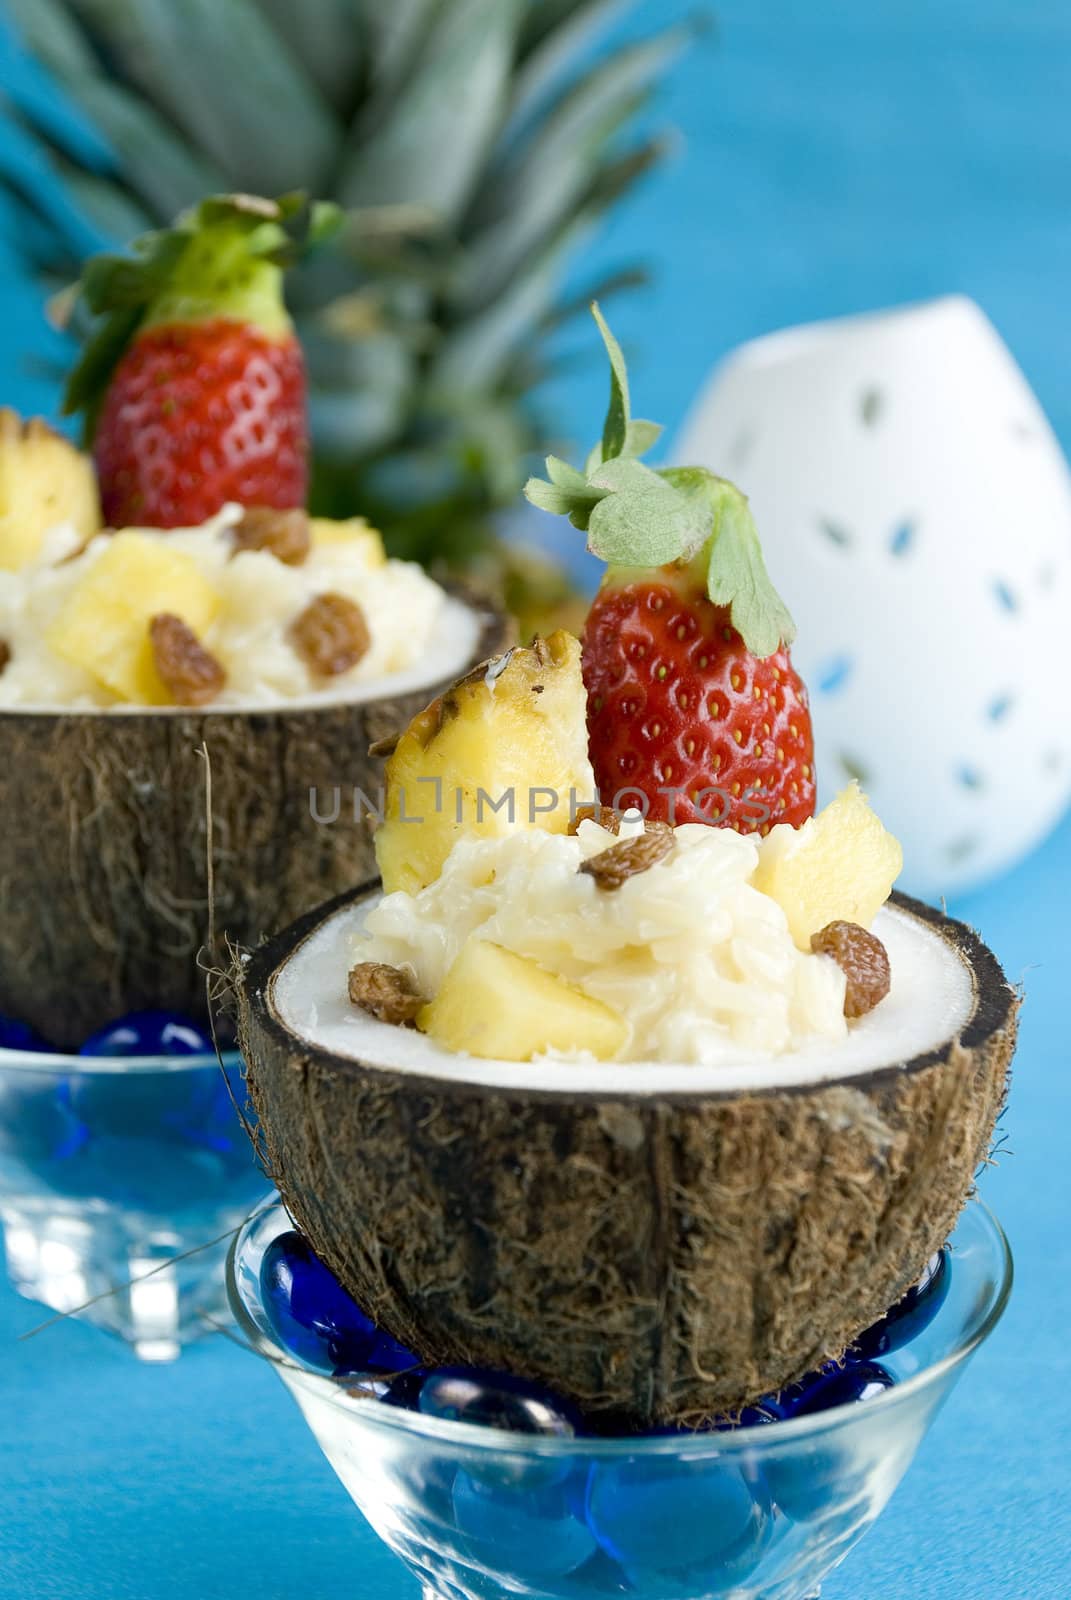 Coconut rice pudding by tomas24